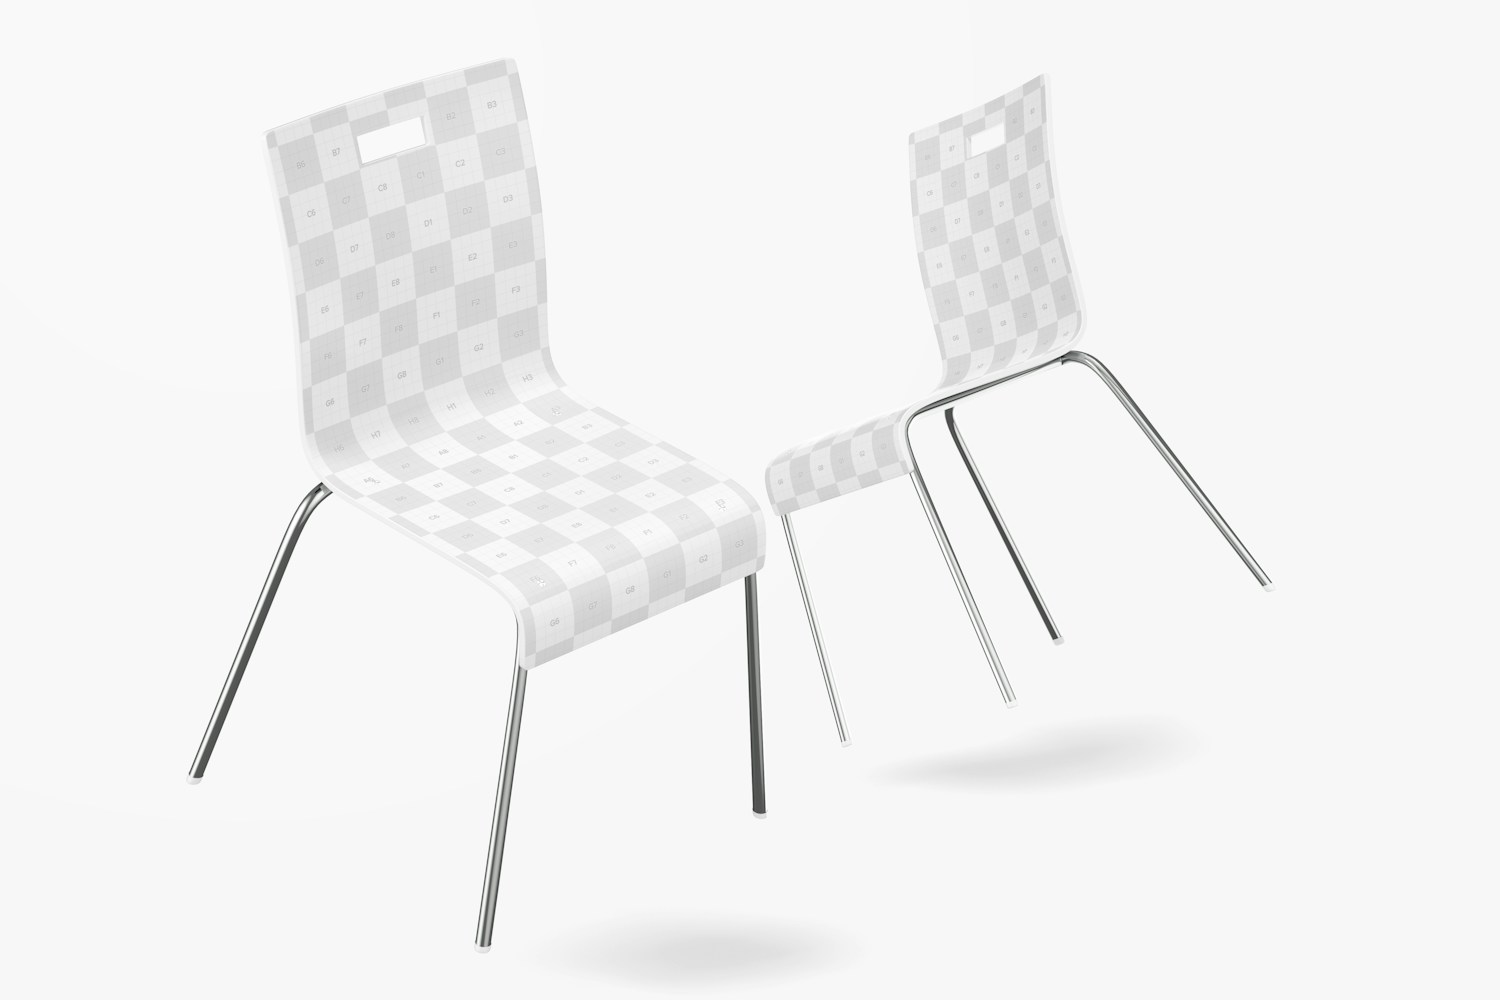 Metal Dining Chairs Mockup, Floating